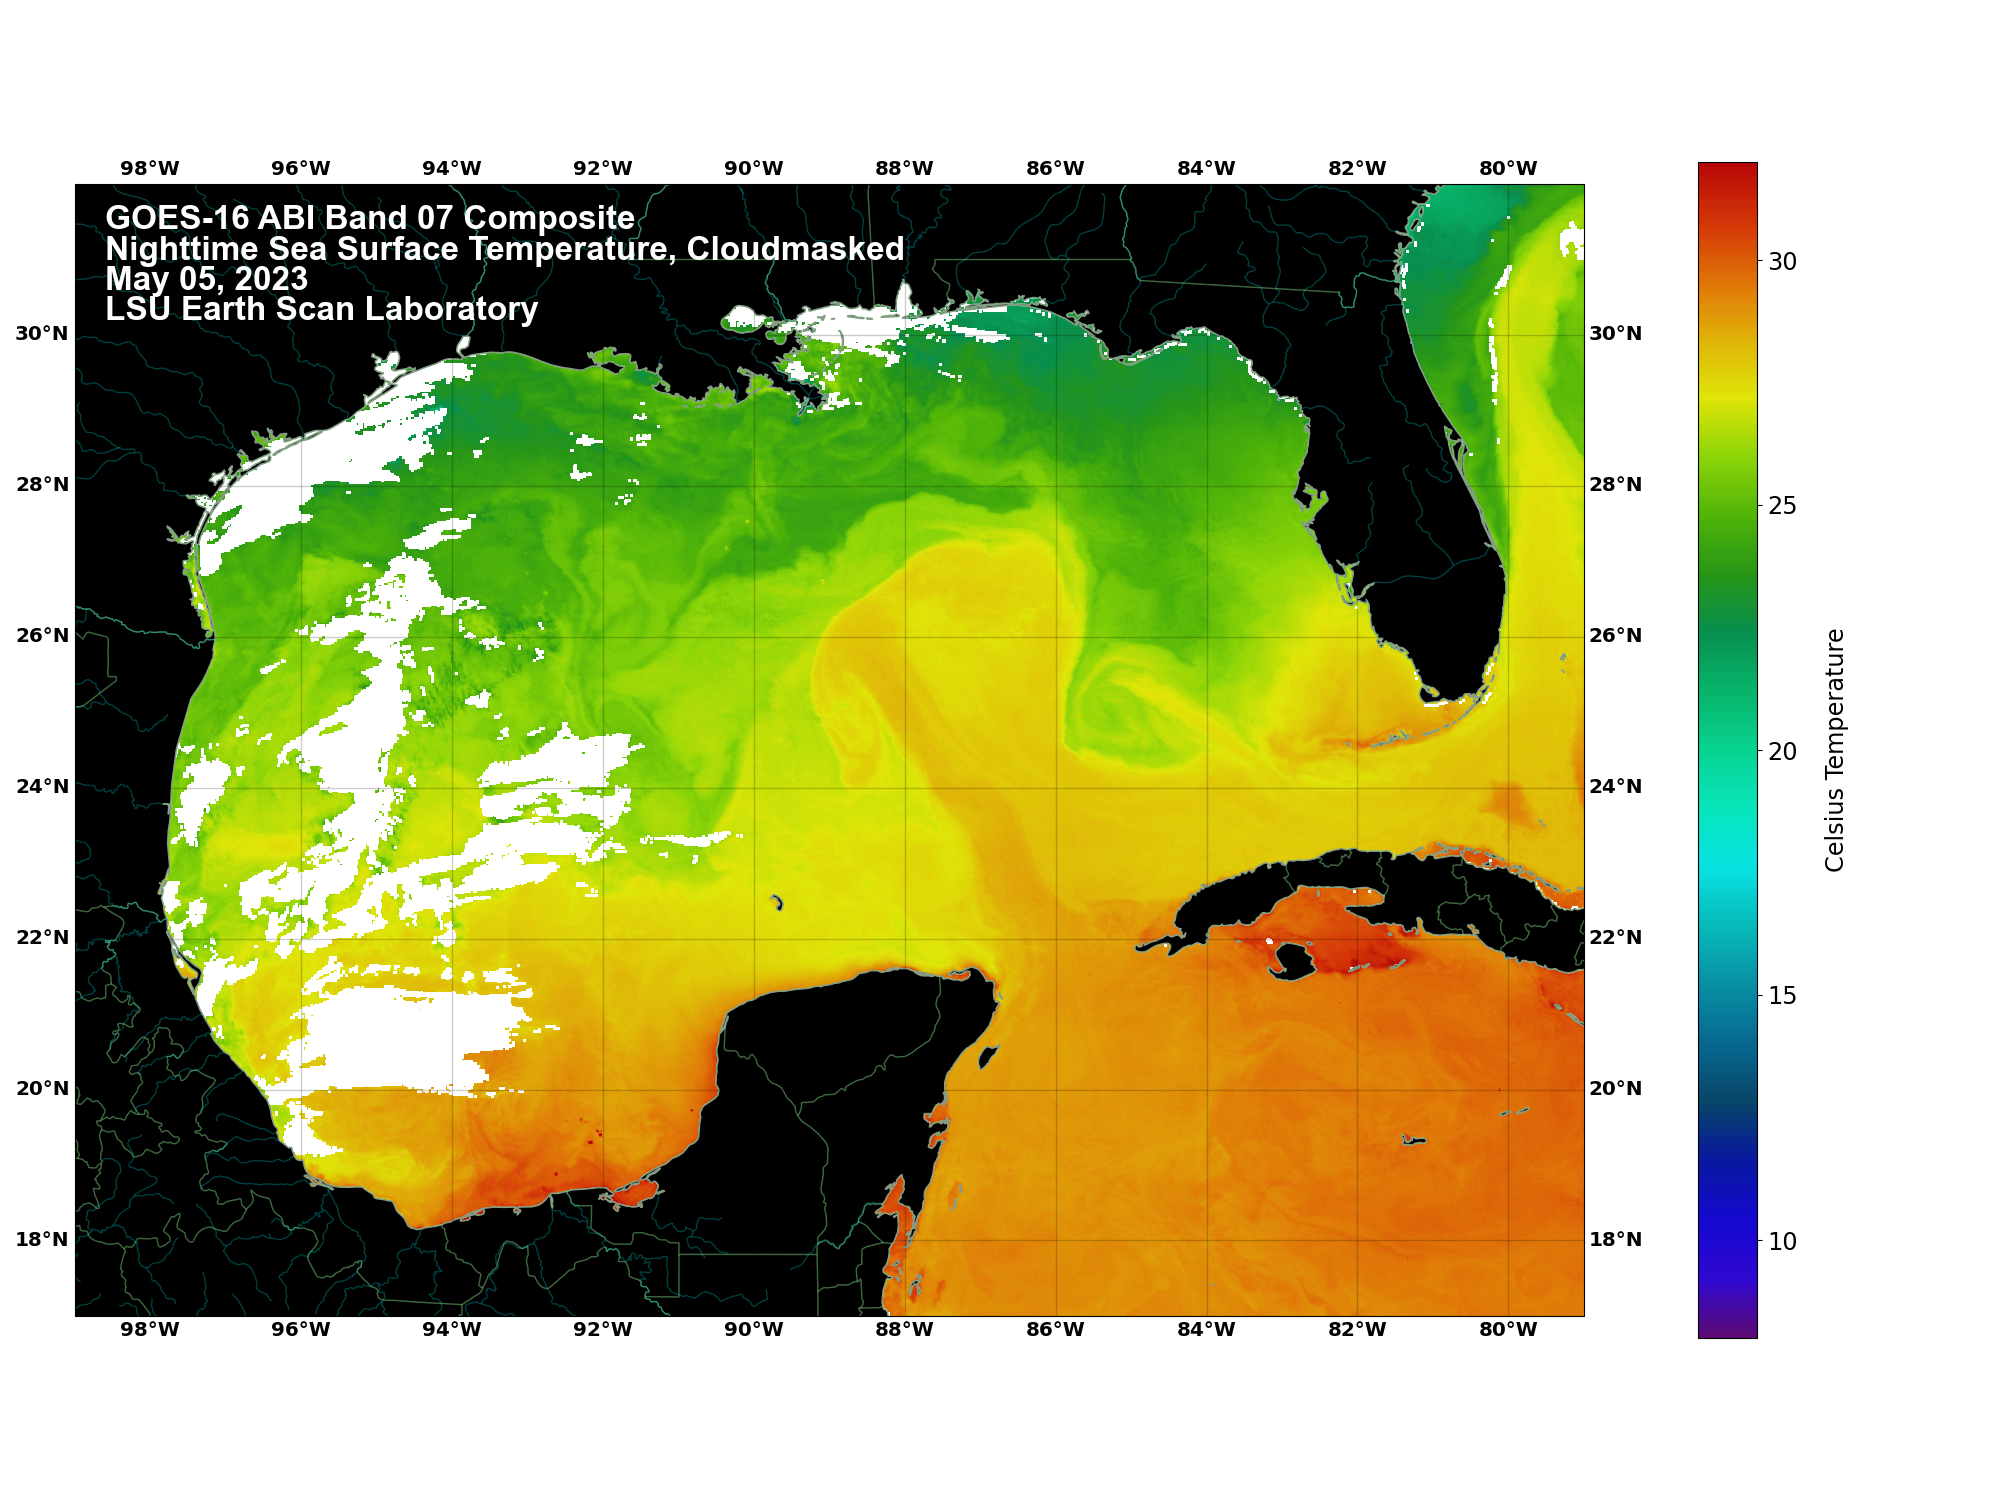 Quicktime movie of cloudmasked composite nighttime sea surface temperature of Gulf of Mexico